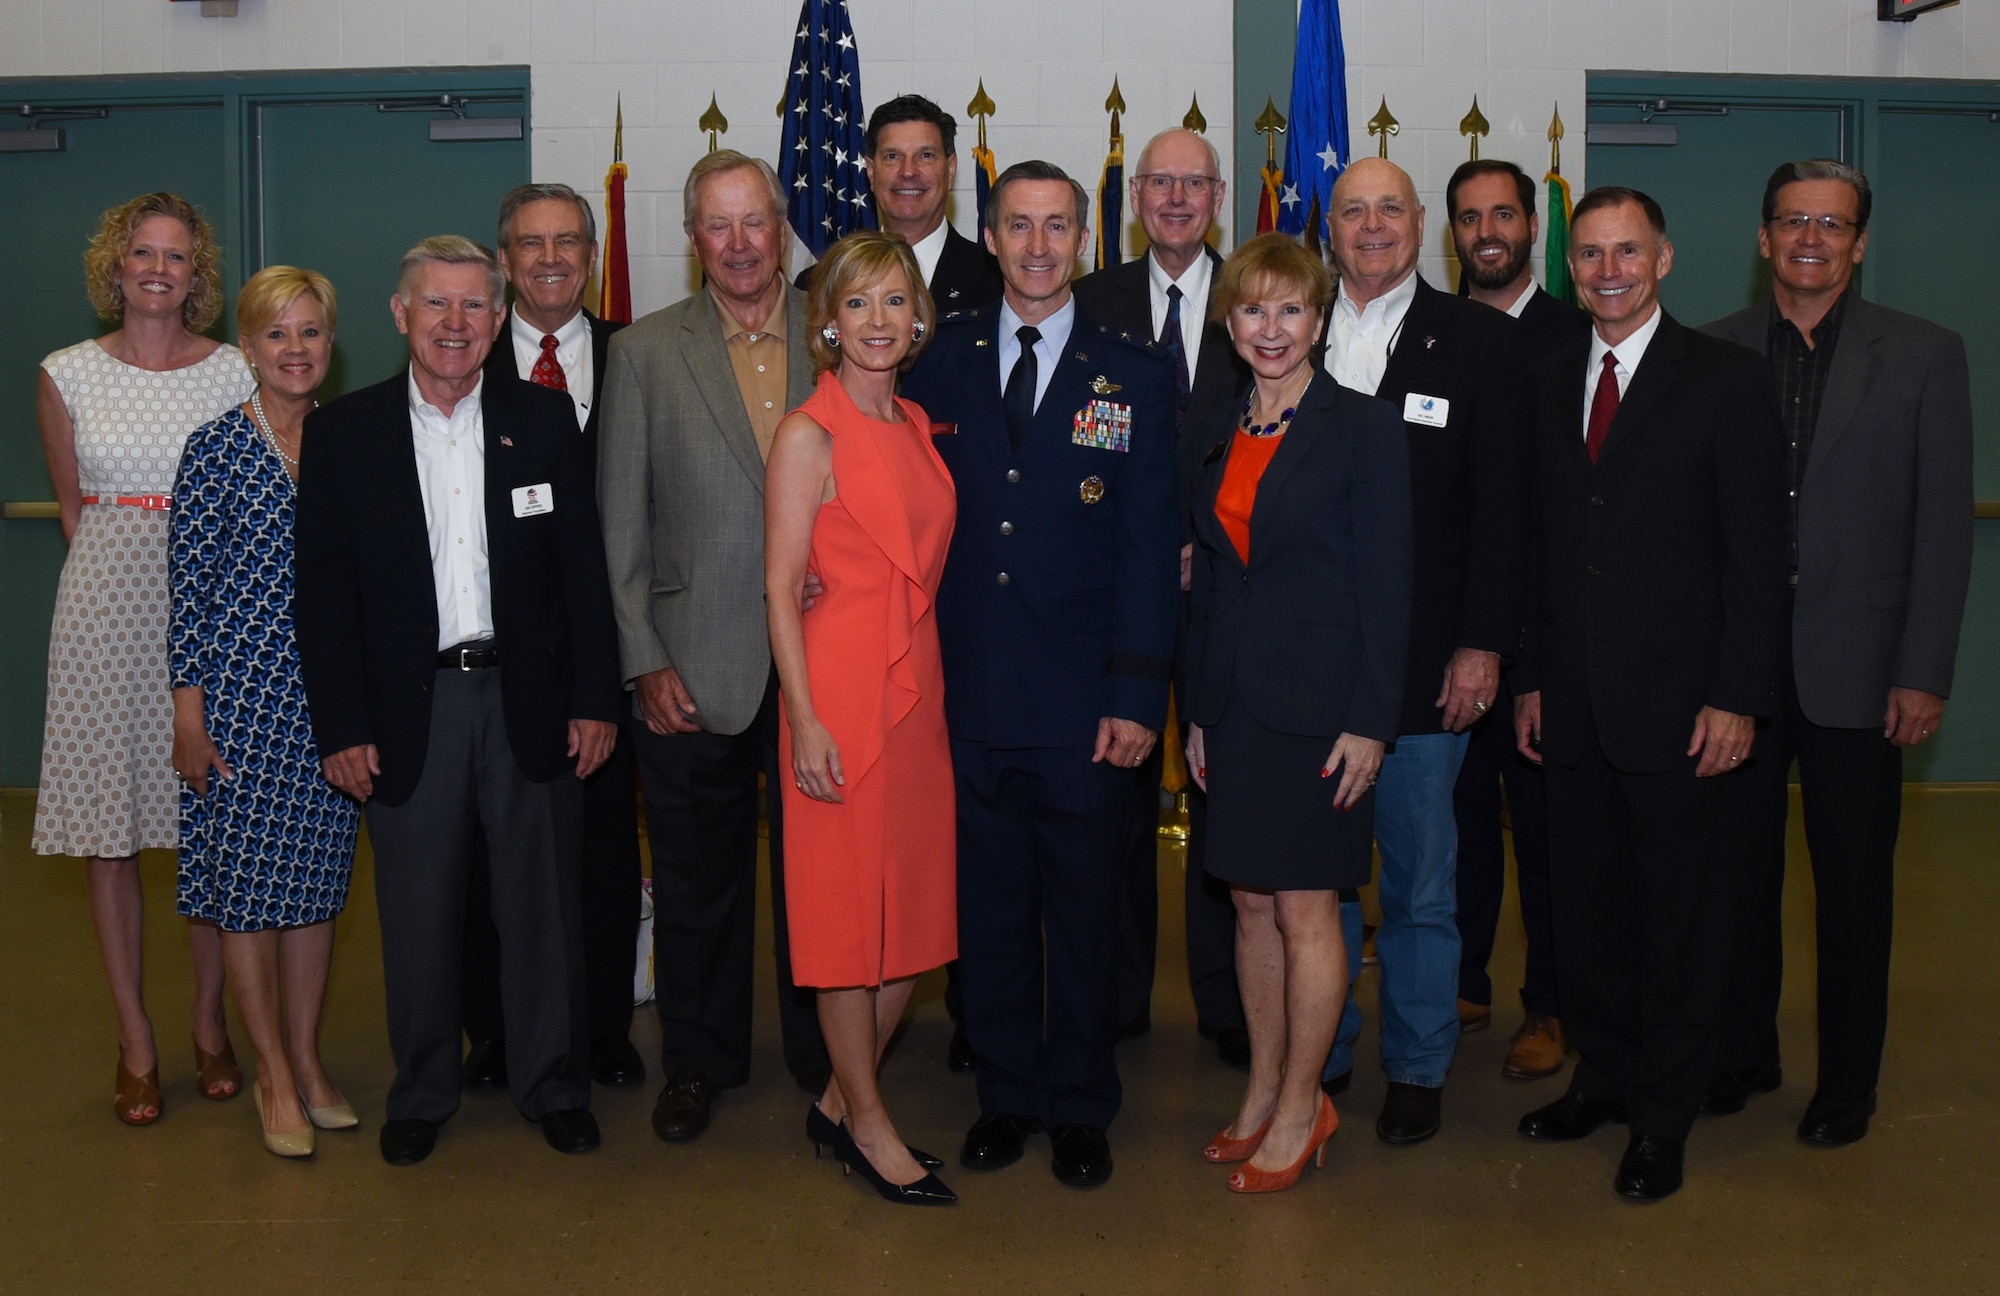 Maj. Gen. Ronald B. "Bruce" Miller, the new Tenth Air Force commander, poses with his wife and civic leaders after a change of command ceremony, May 17, 2017 at Naval Air Station Fort Worth Joint Reserve Base, Texas. This will be Miller's second time commanding a unit here, his first was as the 301st Fighter Wing Commander from 2010-2013. (U.S. Air Force photo by Ms. Julie Briden-Garcia)